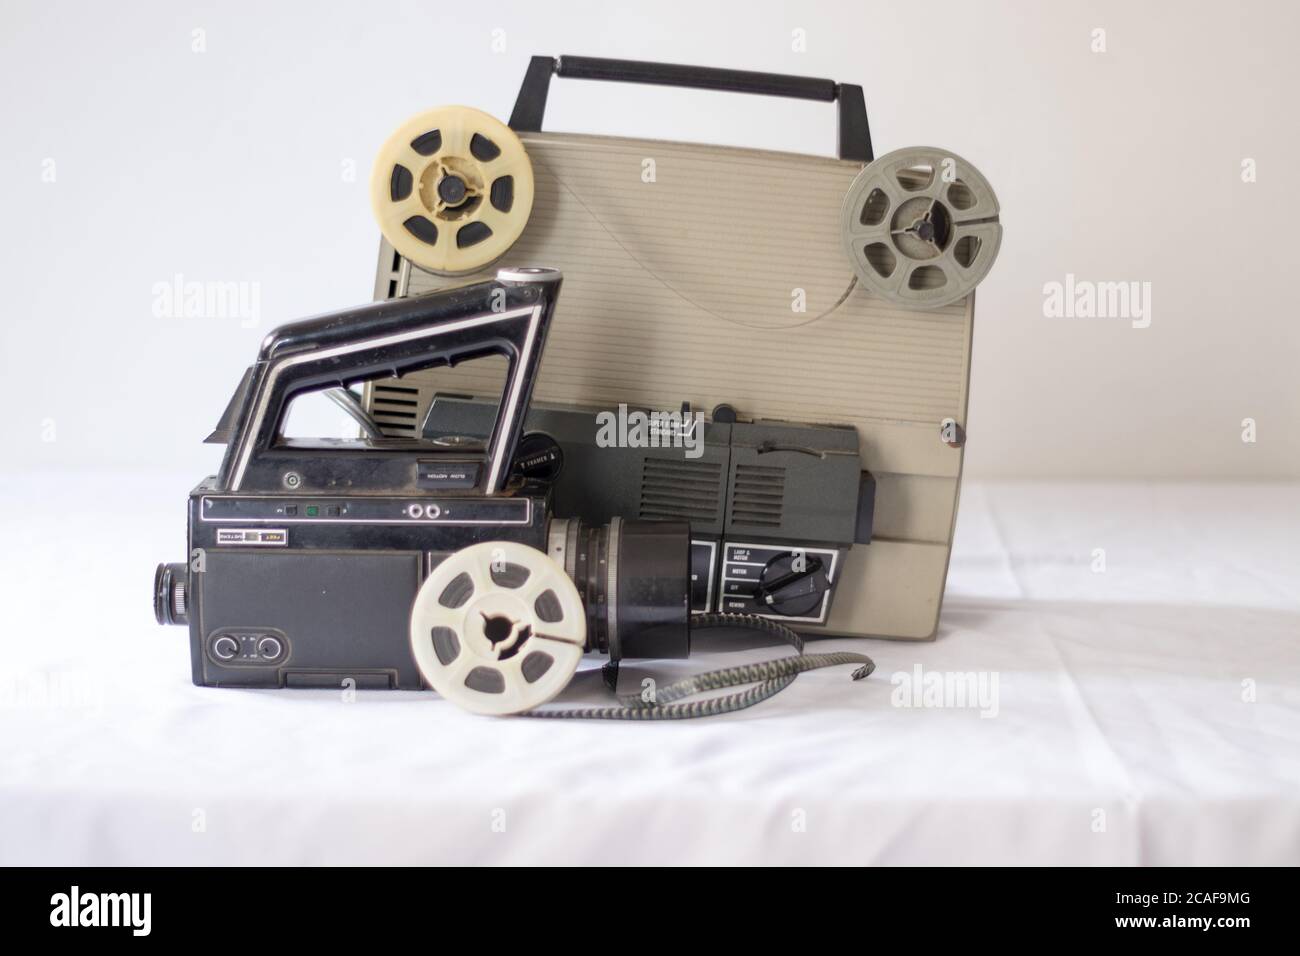 vintage super 8 film camera and projector Stock Photo